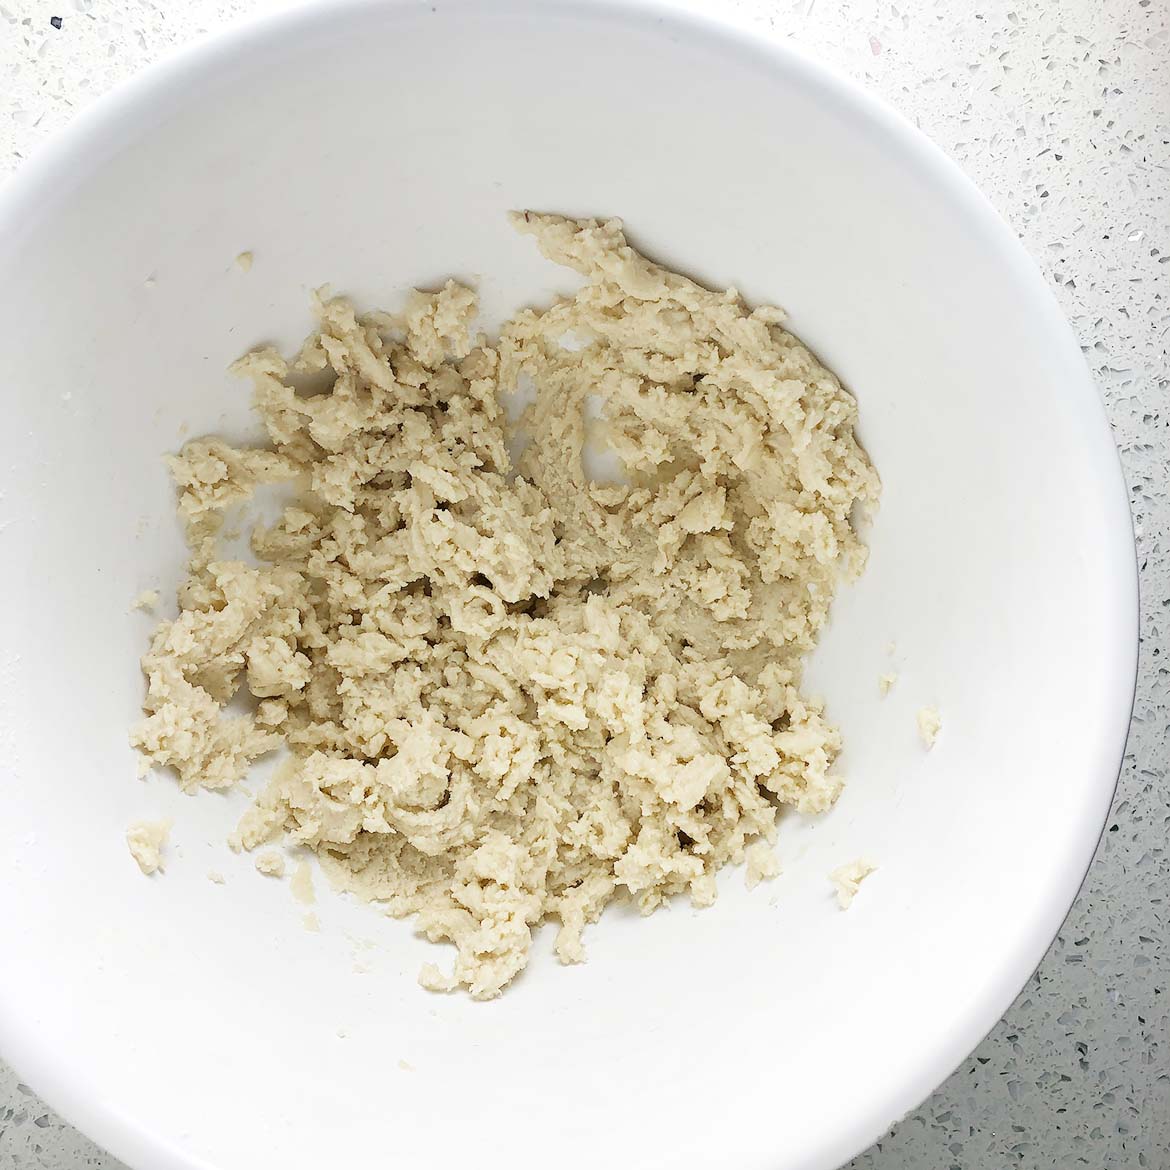 Top-down view of mixing bowl containing dough for Vegan Brown Butter Shortbread Cookies